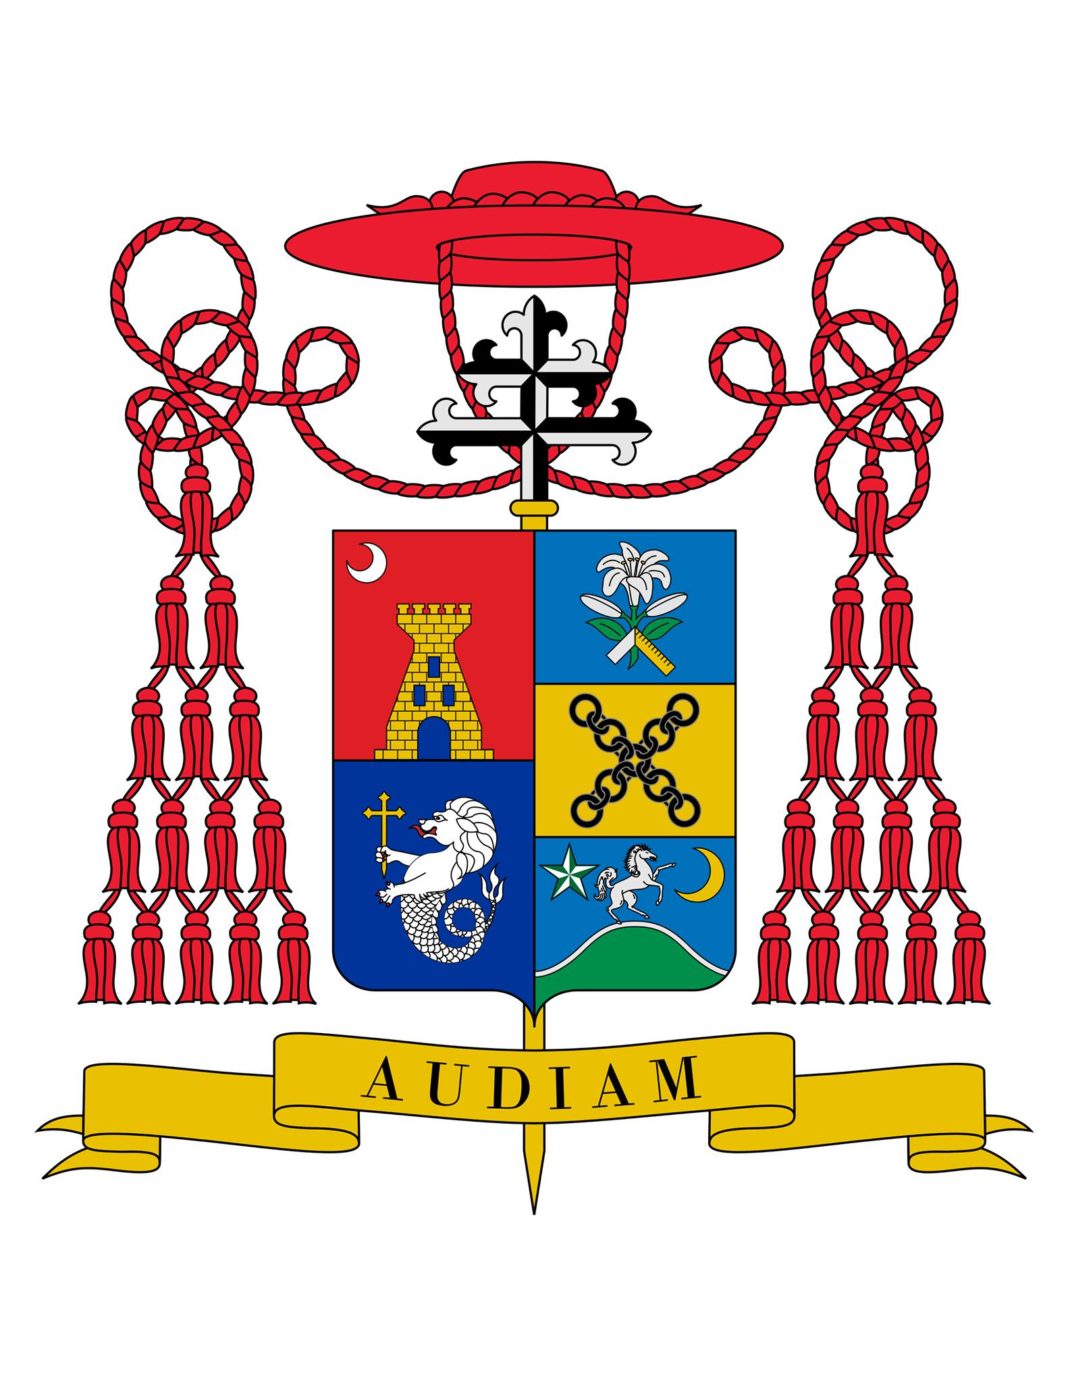 Archdiocese of Manila unveils Cardinal Advincula’s coat of arms | The ...